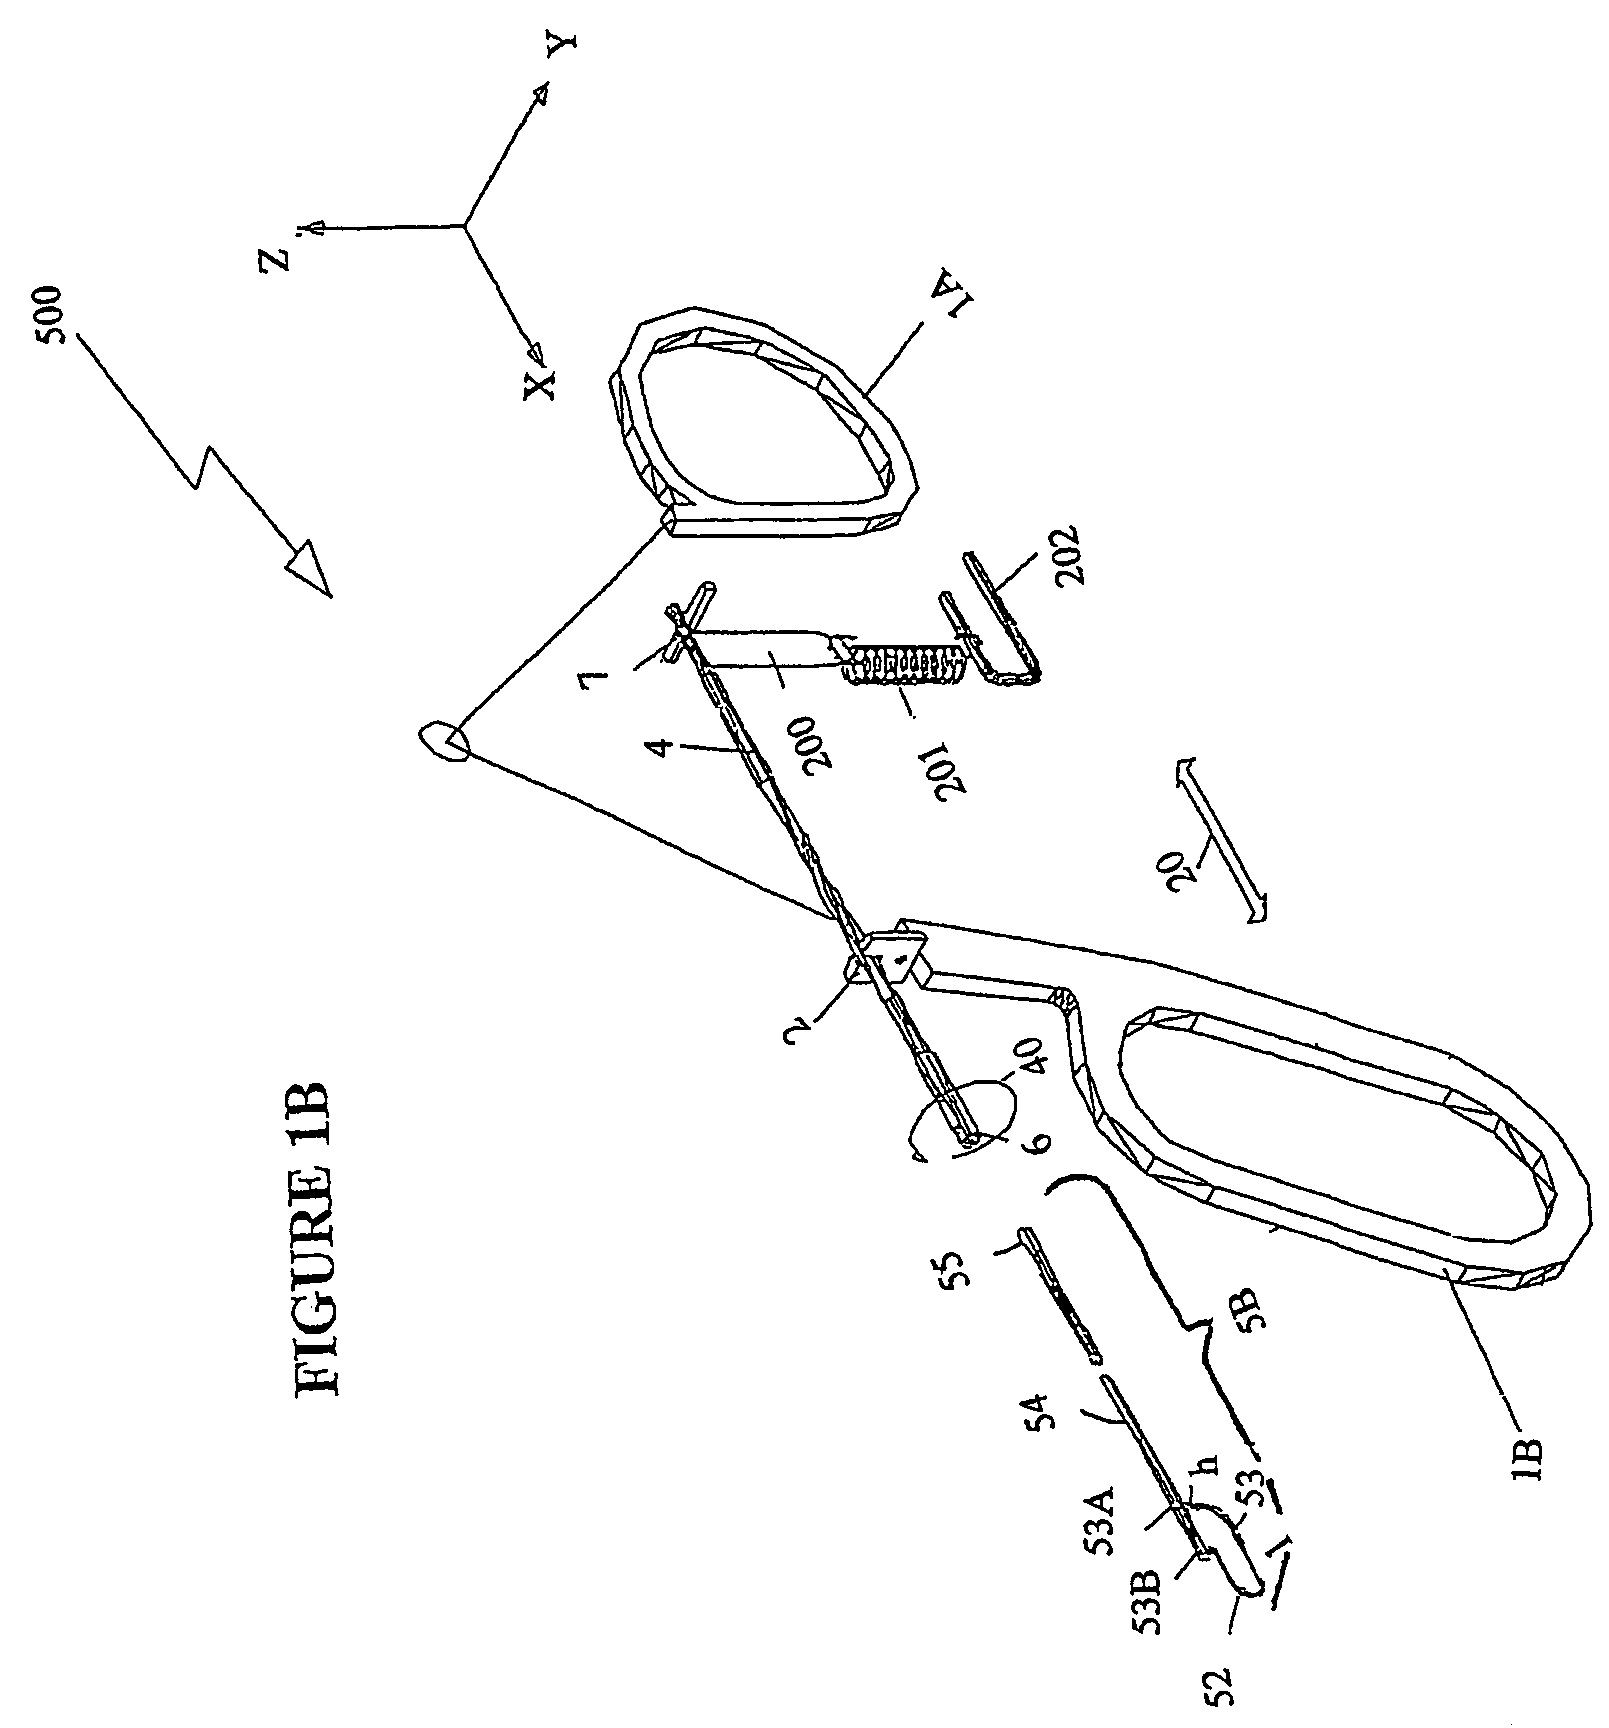 Working tool for accurate lateral resection of biological tissue and a method for use thereof